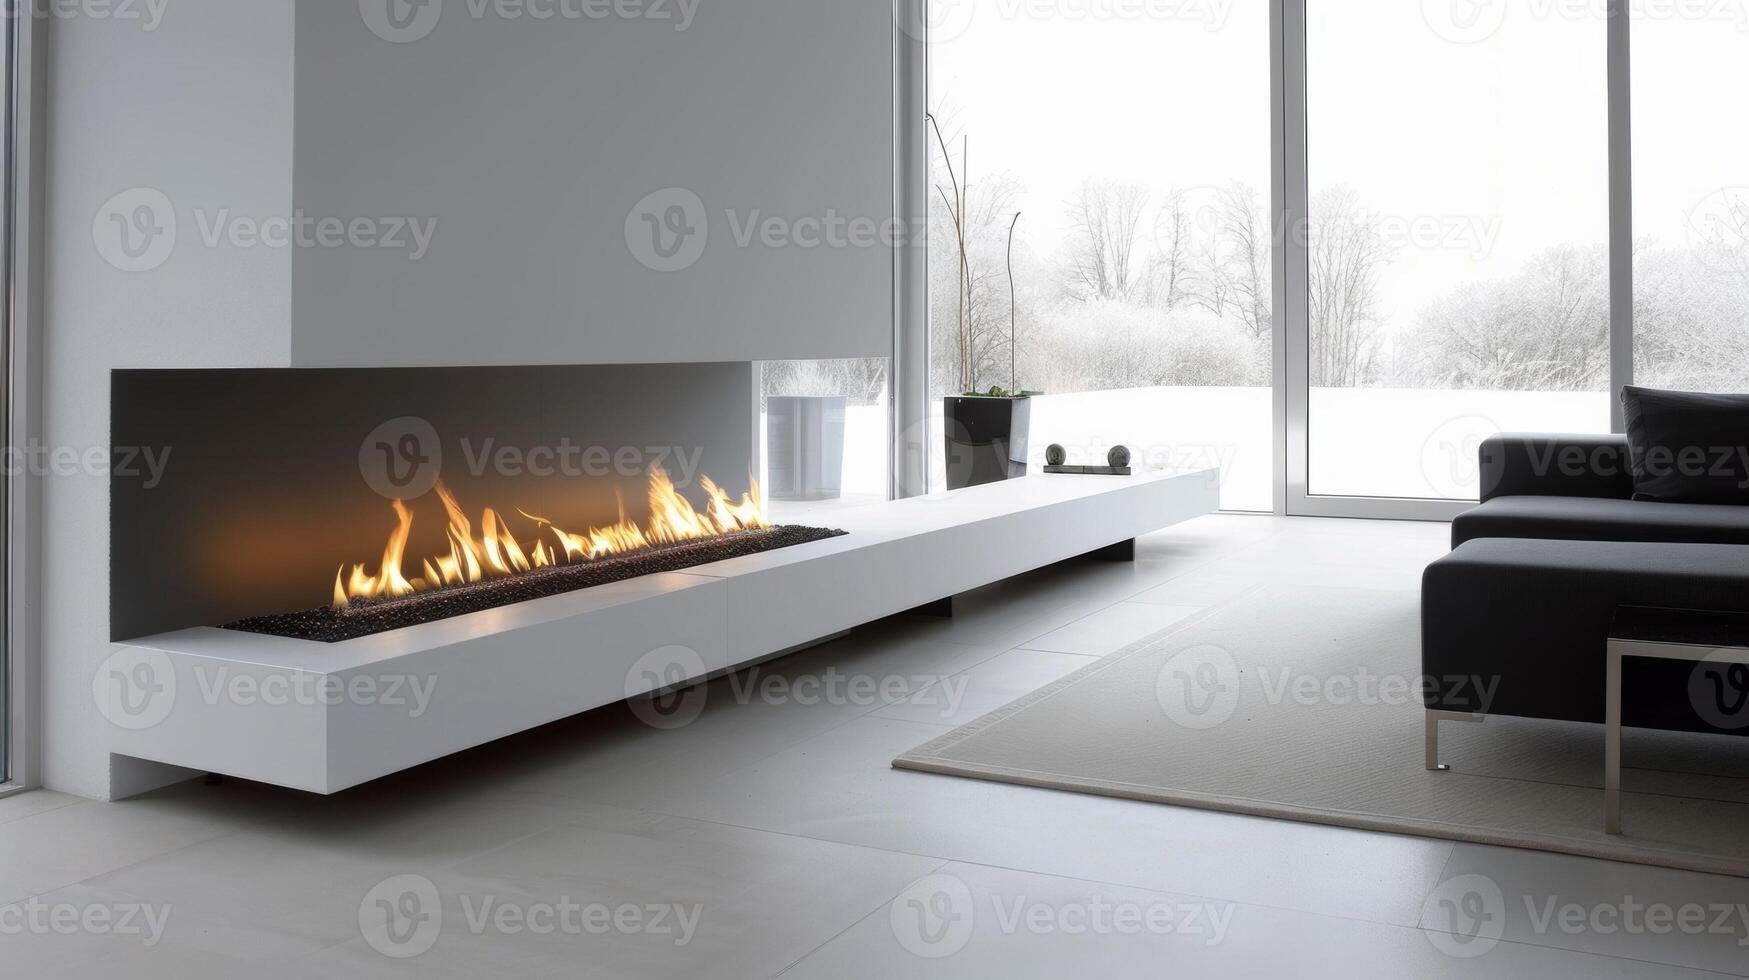 A minimalist fireplace design featuring a sleek white base and interchangeable modules for added customization. 2d flat cartoon photo